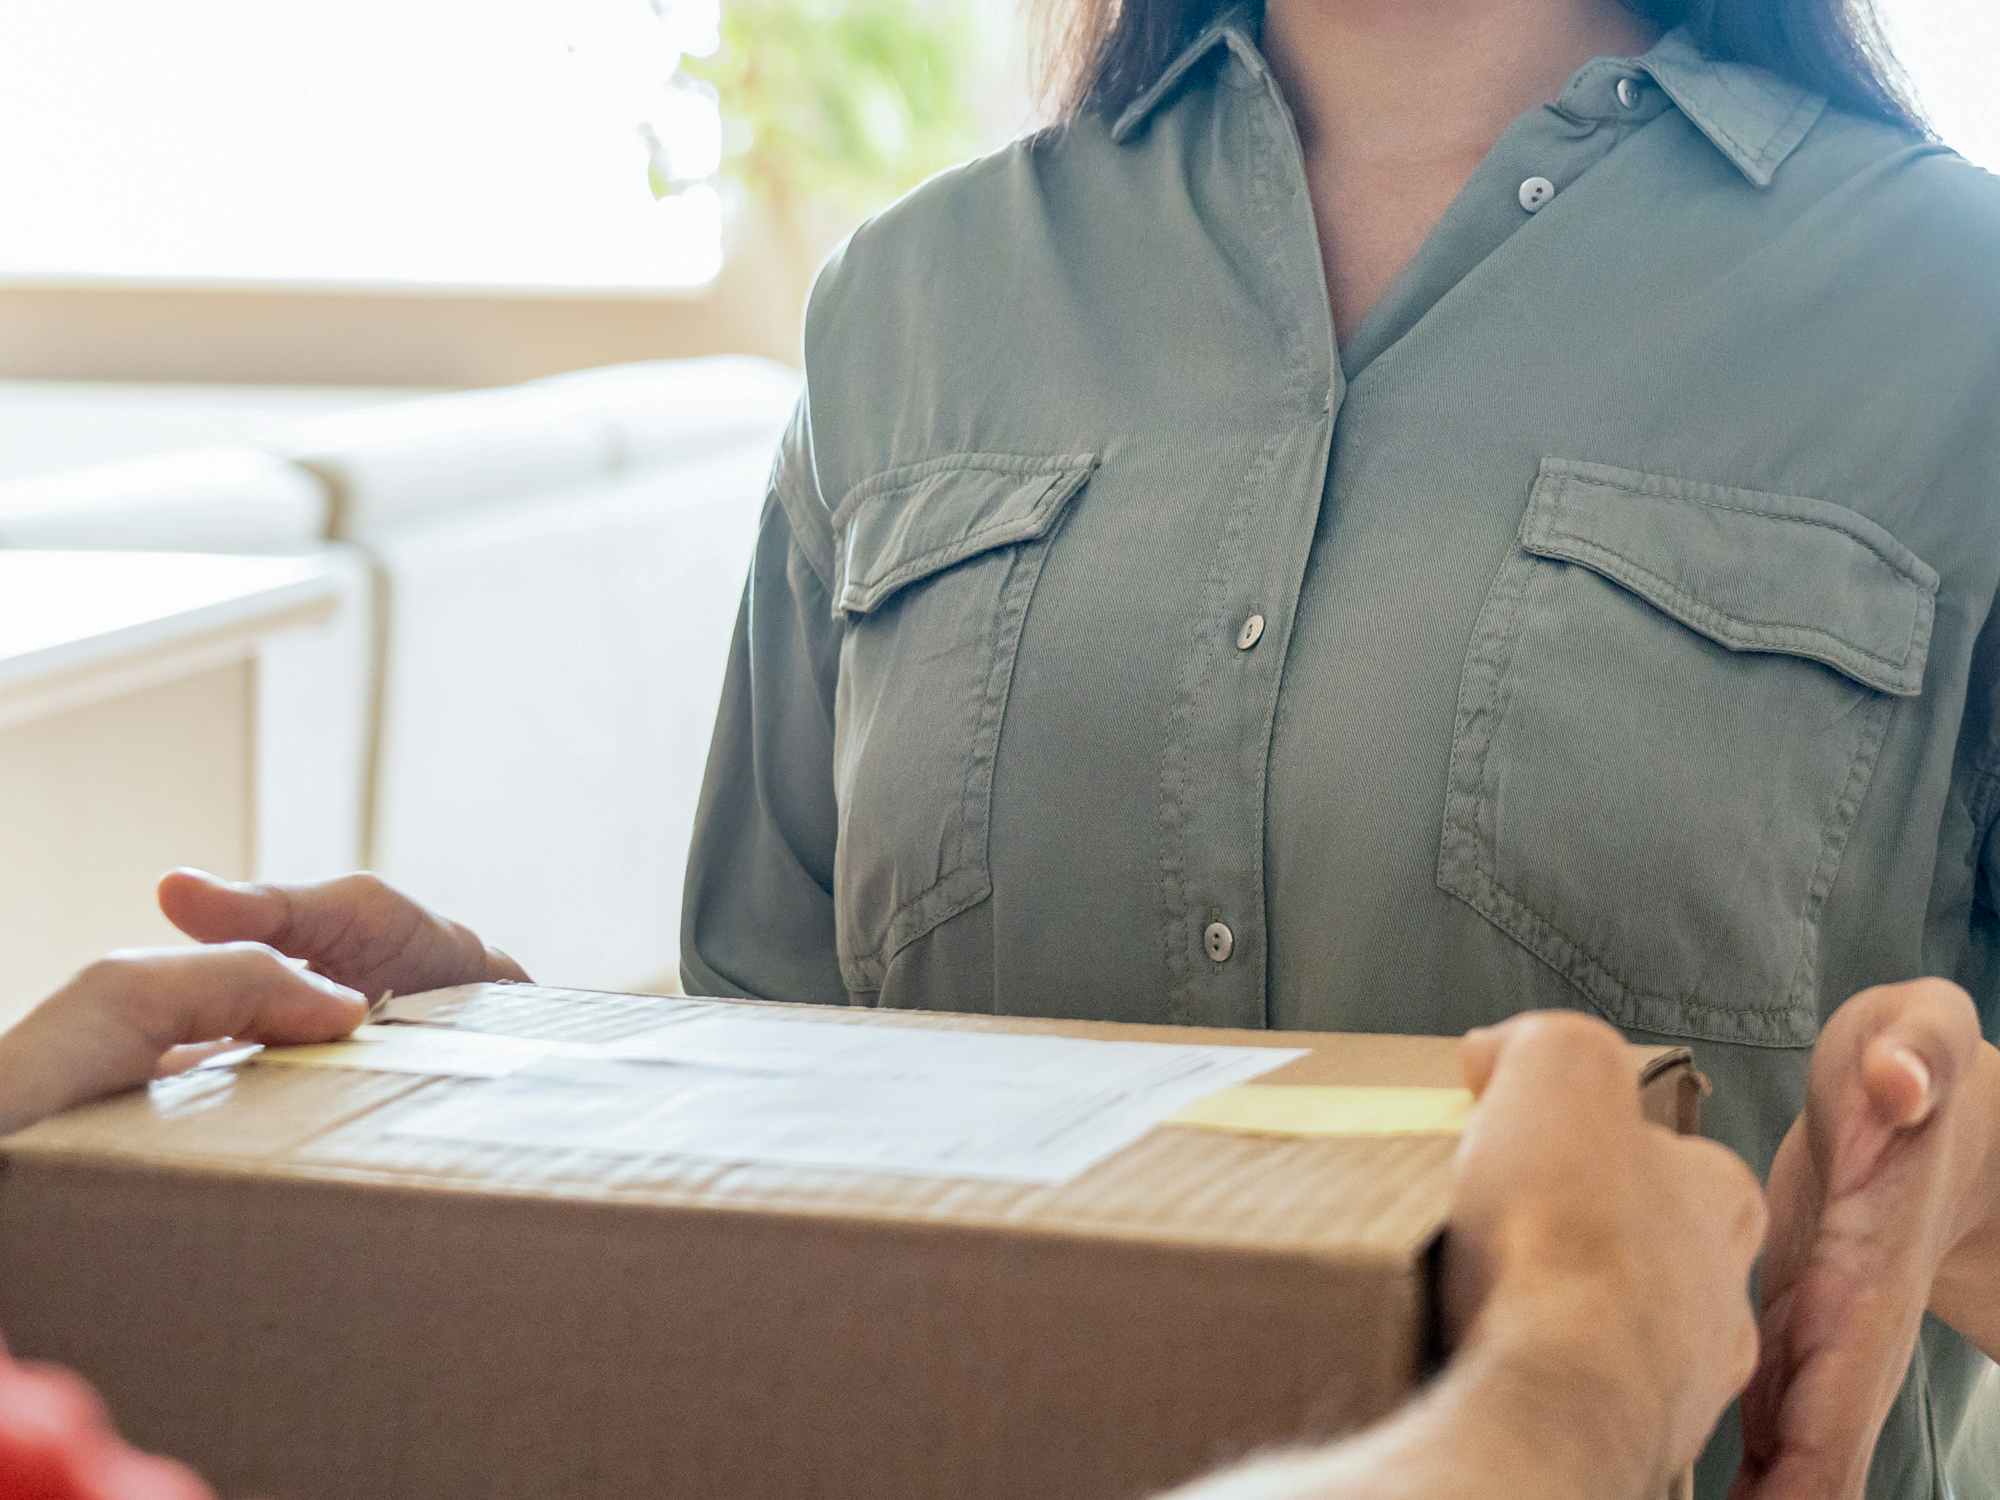 a person receiving a delivery box at home